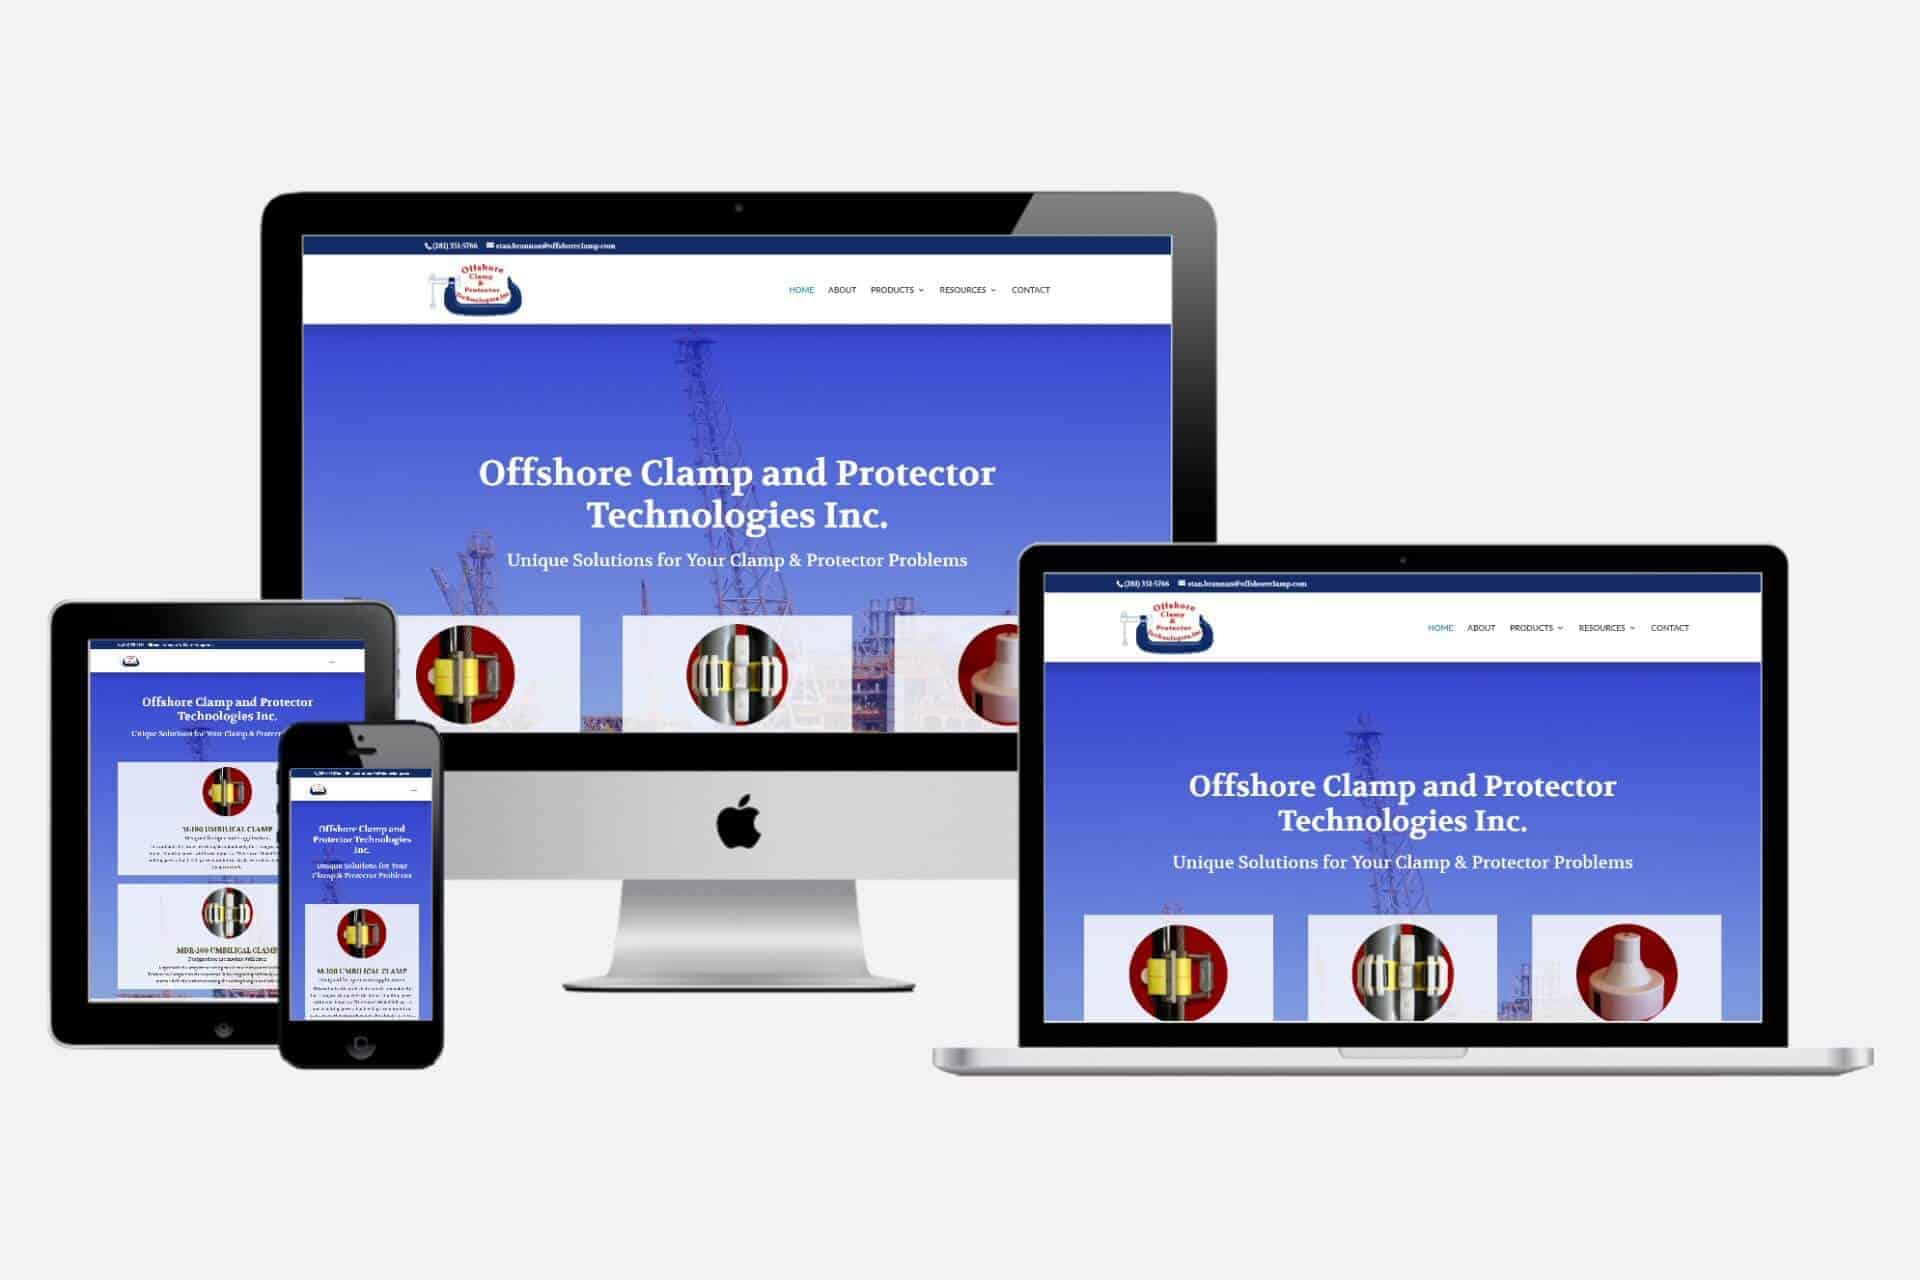 Offshore Clamp & Protector Technologies Inc. - Small Business Website Design by WizardsWebs Design LLC